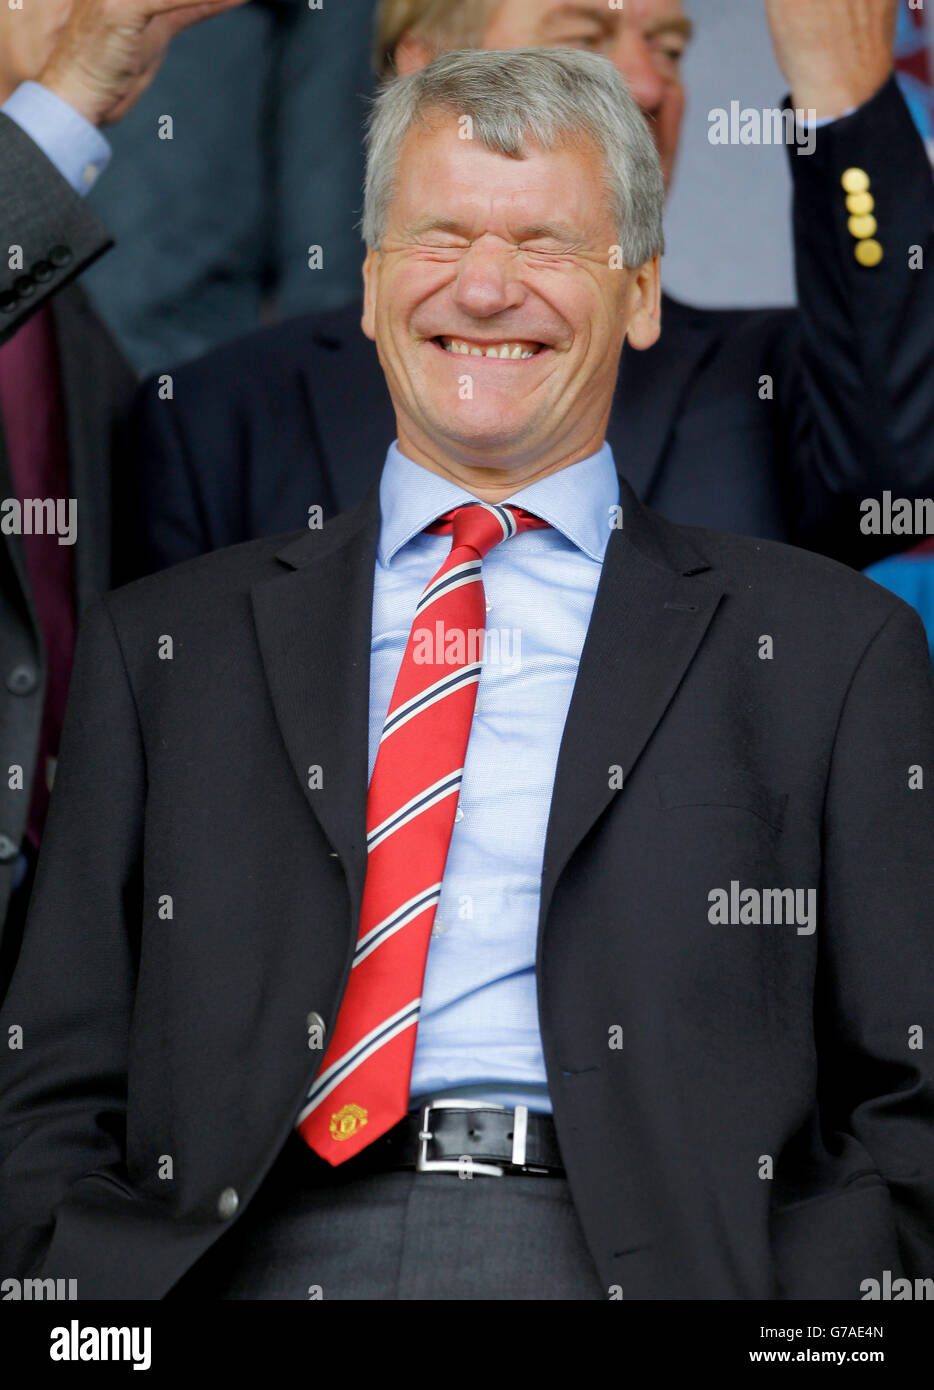 Soccer - Barclays Premier League - Burnley v Manchester United - Turf Moor. Manchester United chief executive David Gill Stock Photo